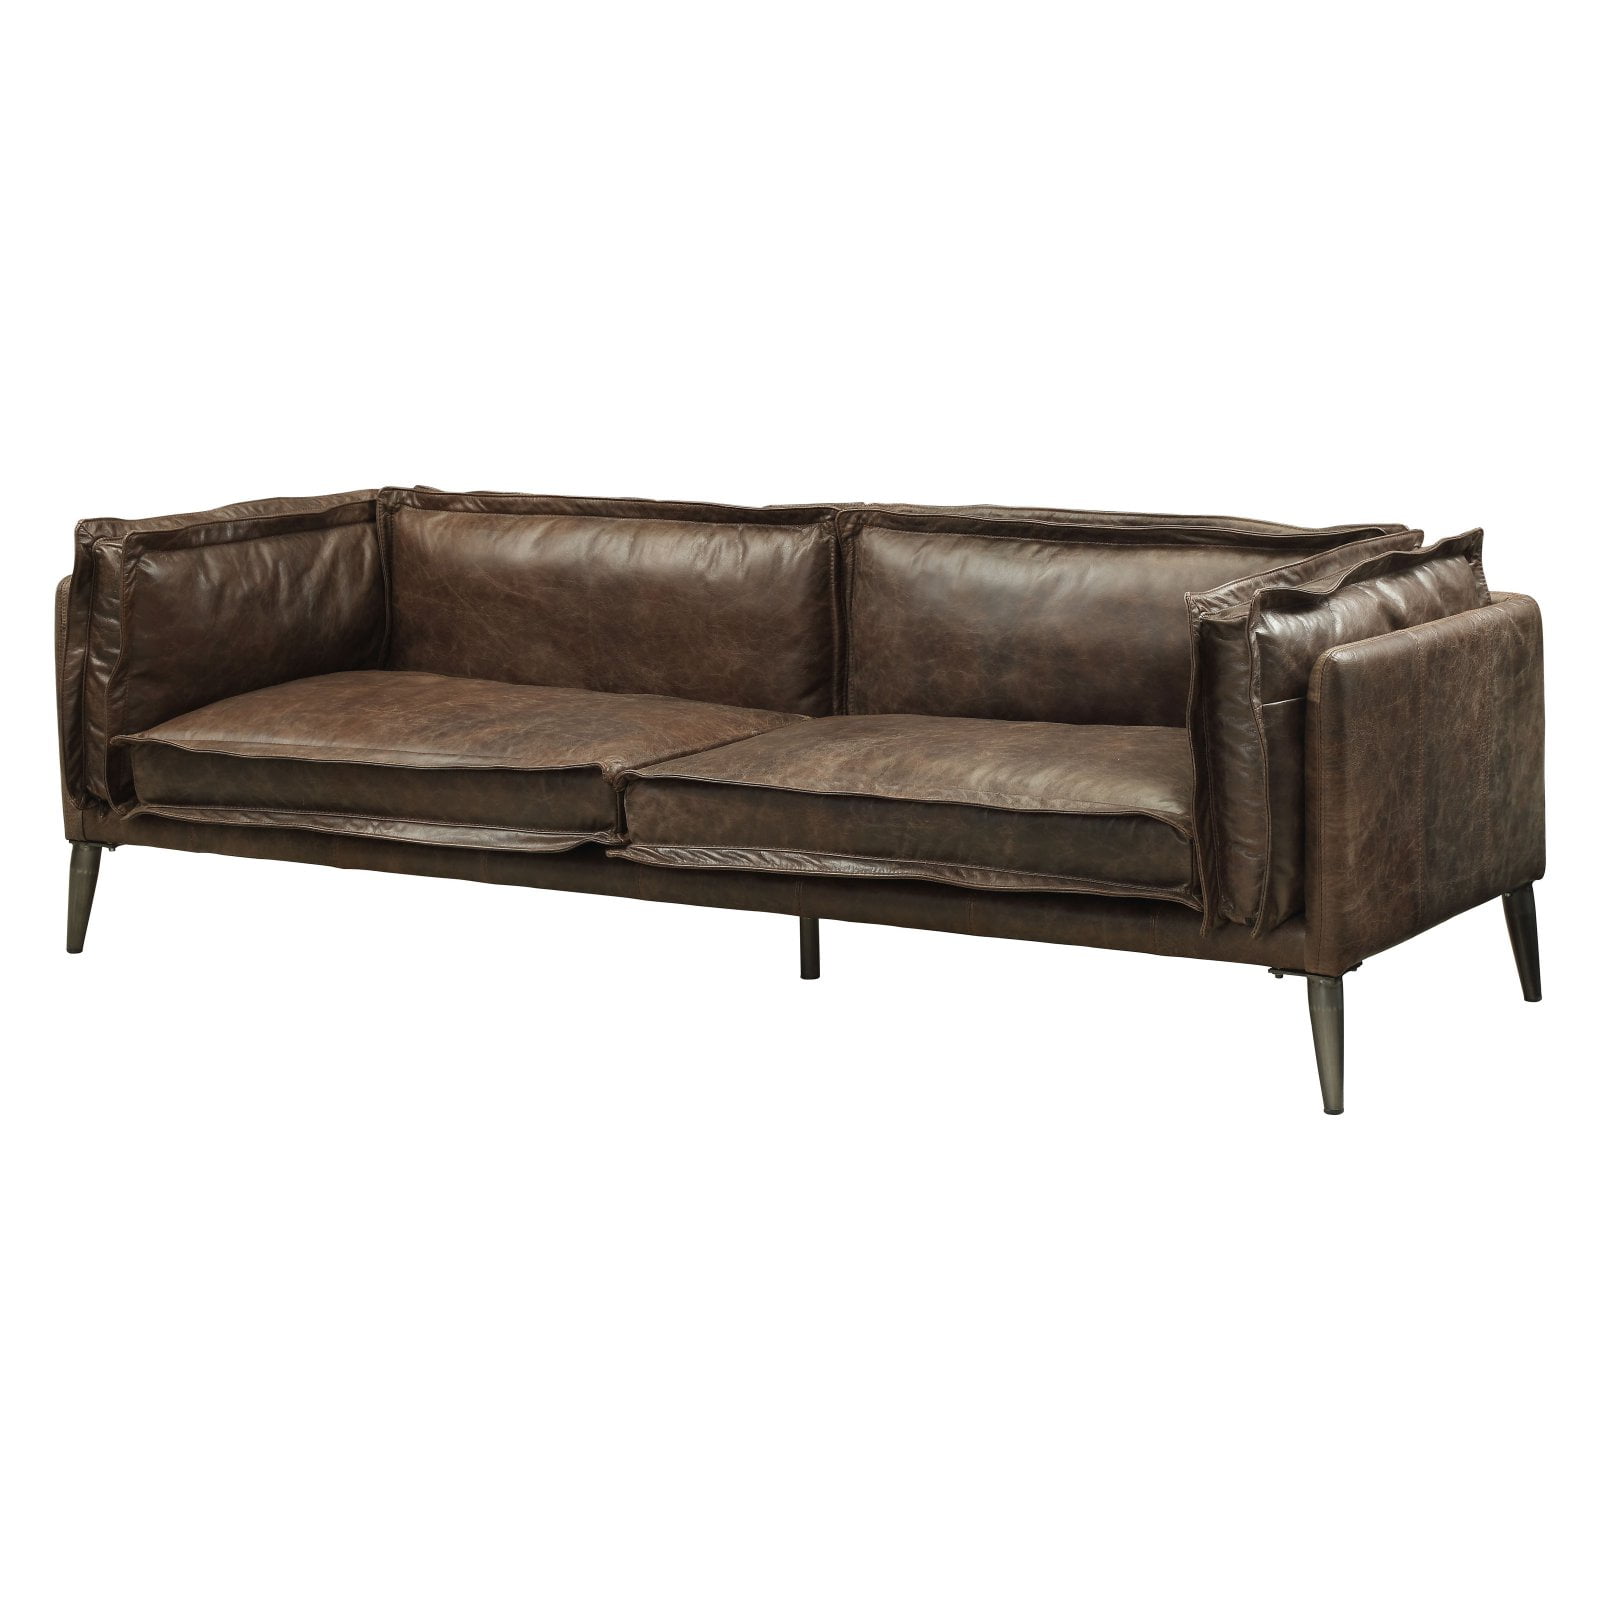 Picture of ACME 52480 Porchester Sofa - Distress Chocolate Top Grain Leather - 30 x 95 x 34 in.